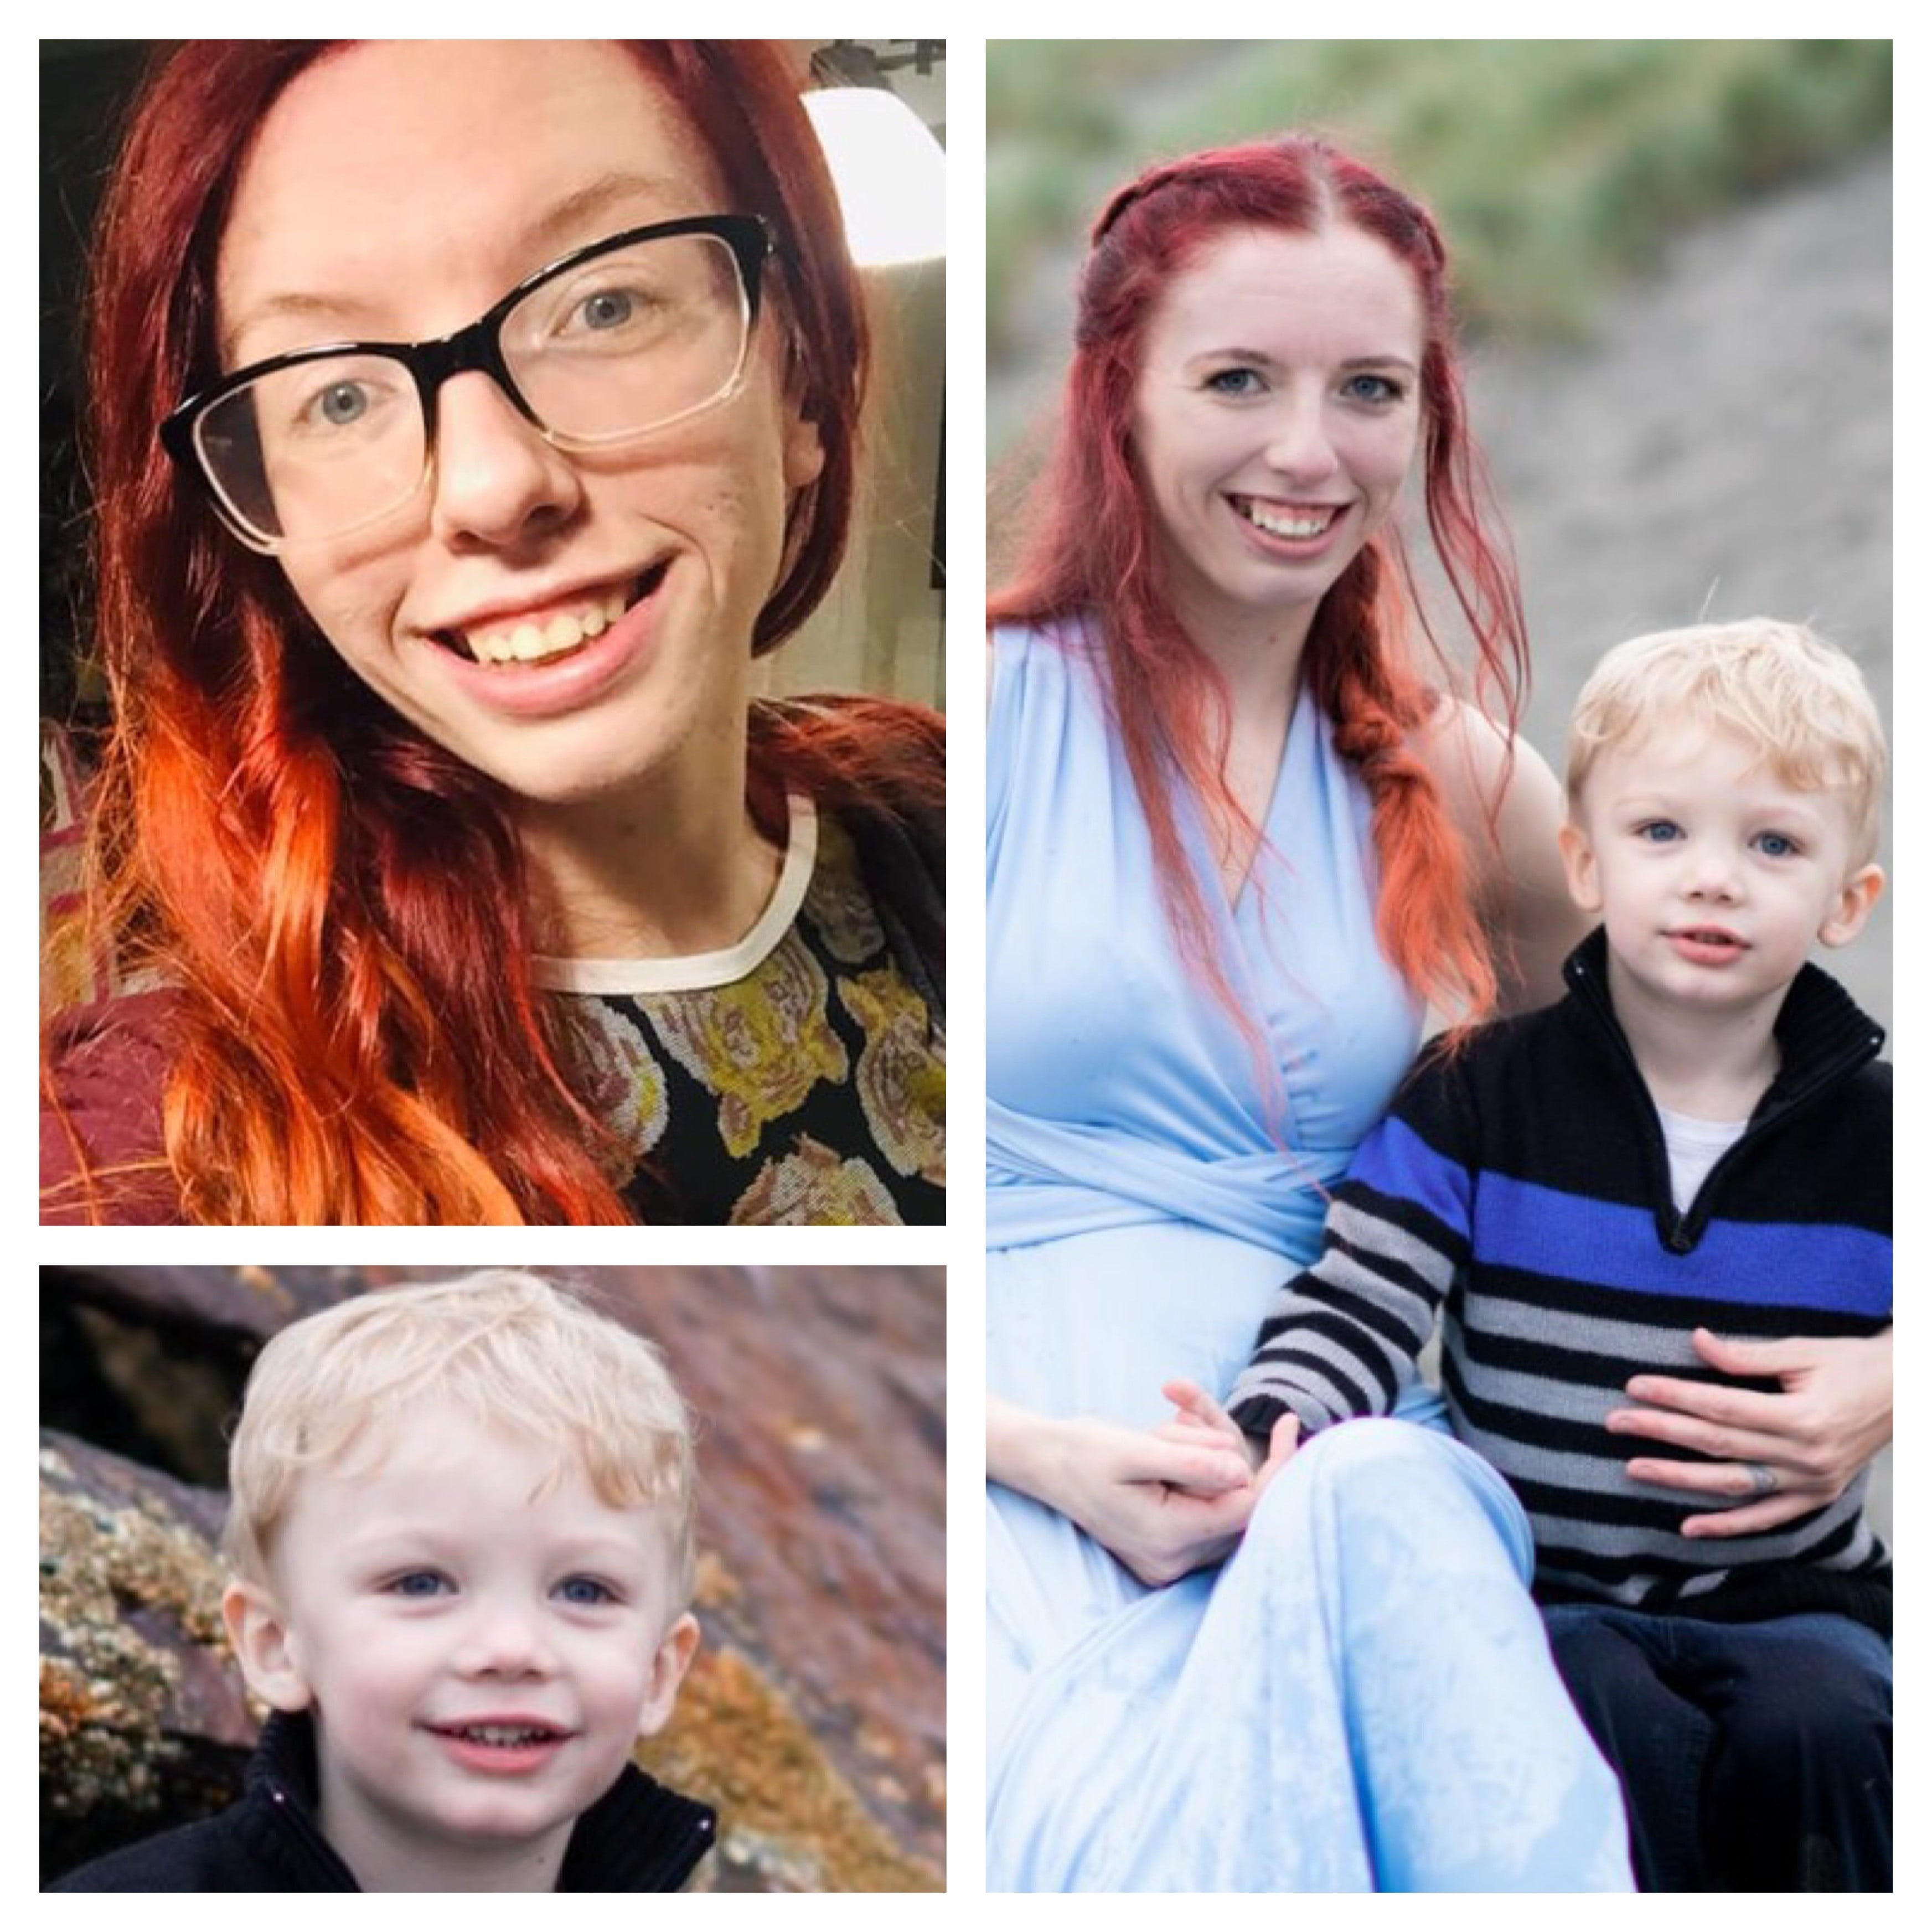 Karissa Alyn Fretwell, 25, and her son, Billy, 3, have not been seen or heard from since May 13.